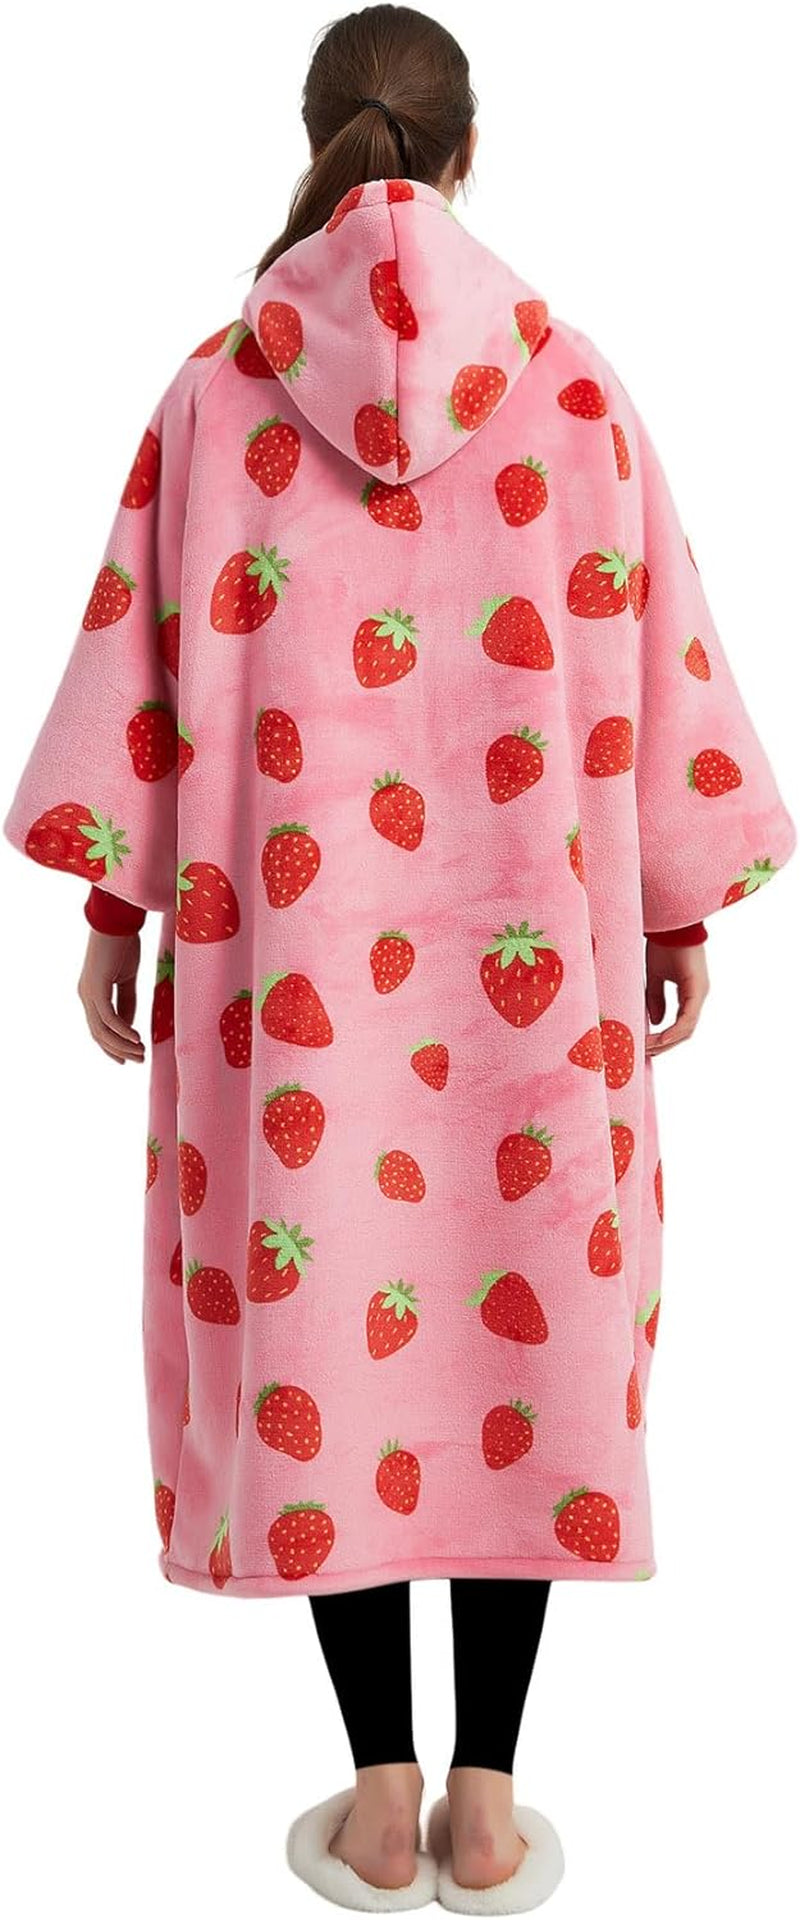 Wearable Blanket Hoodie Strawberry Pattern for Adult